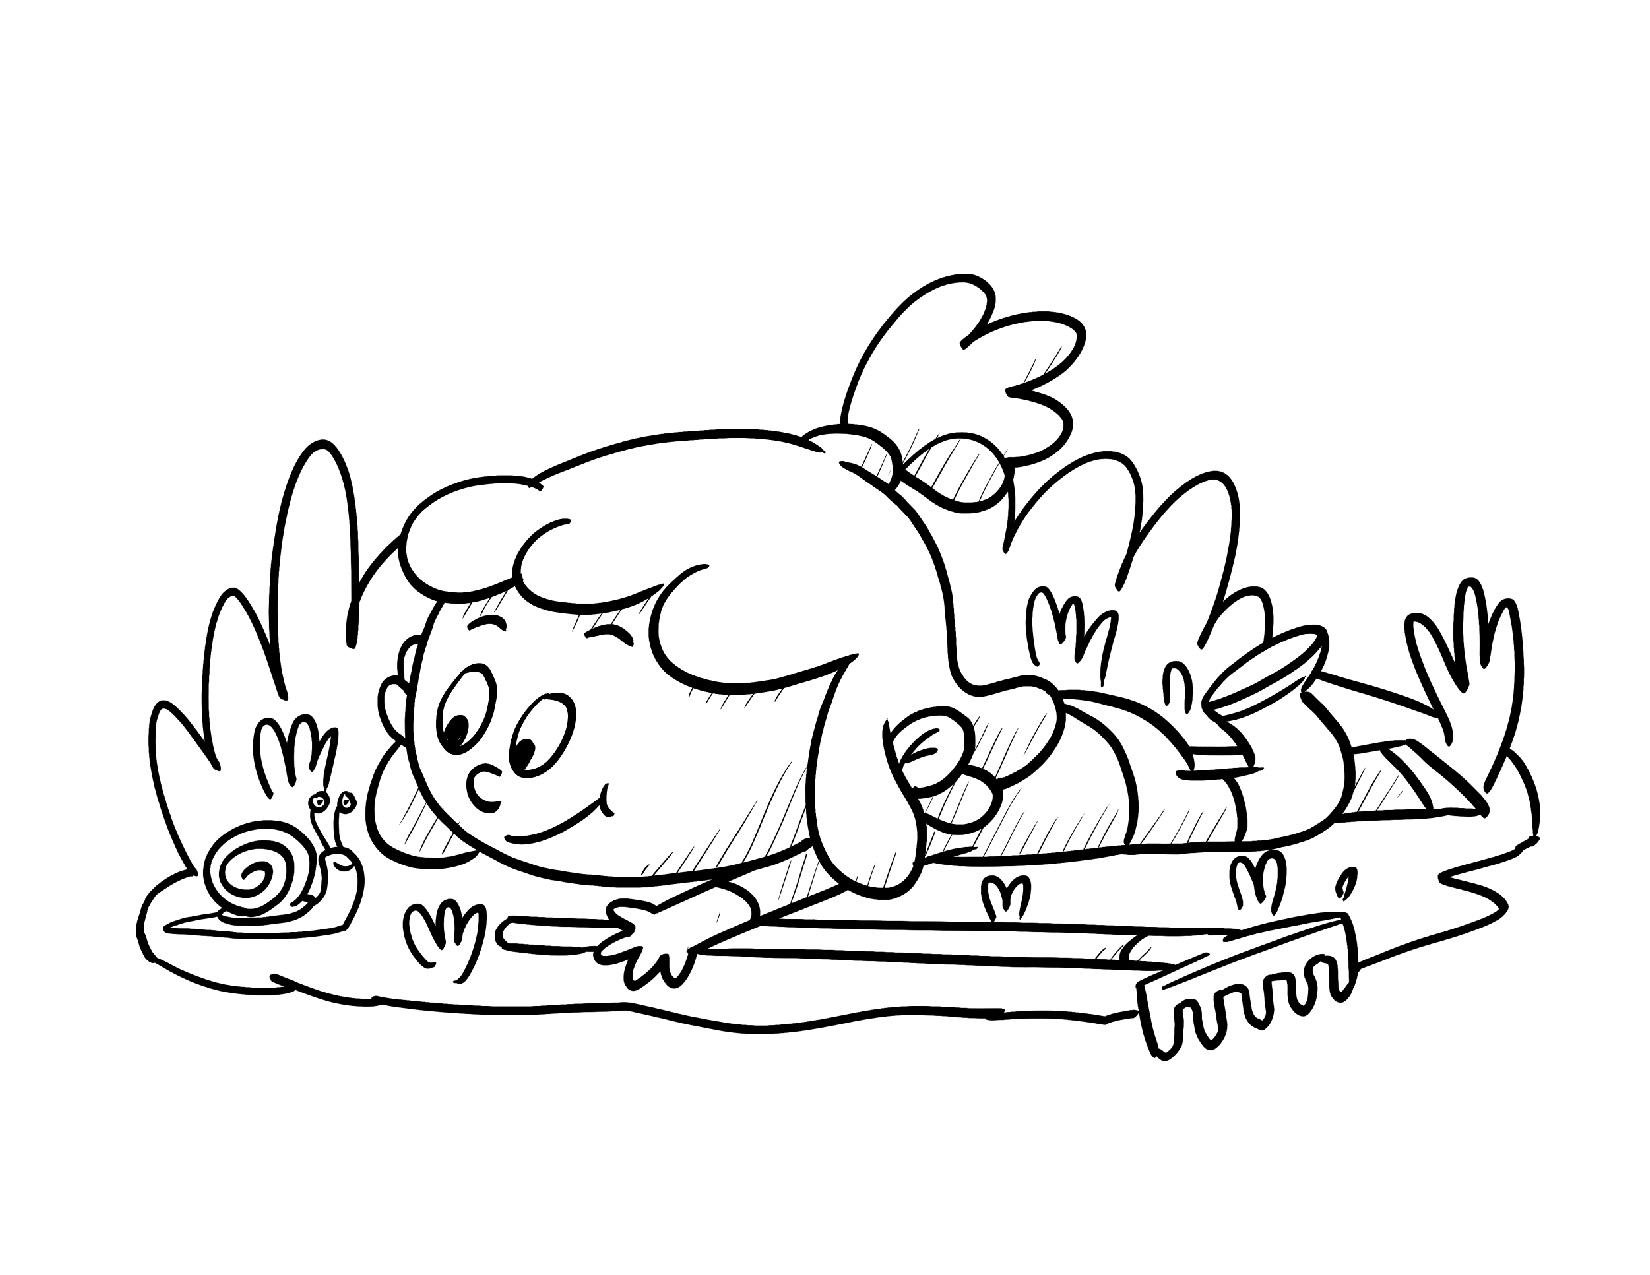 Coloring Page of a girl gardening and watching a snail